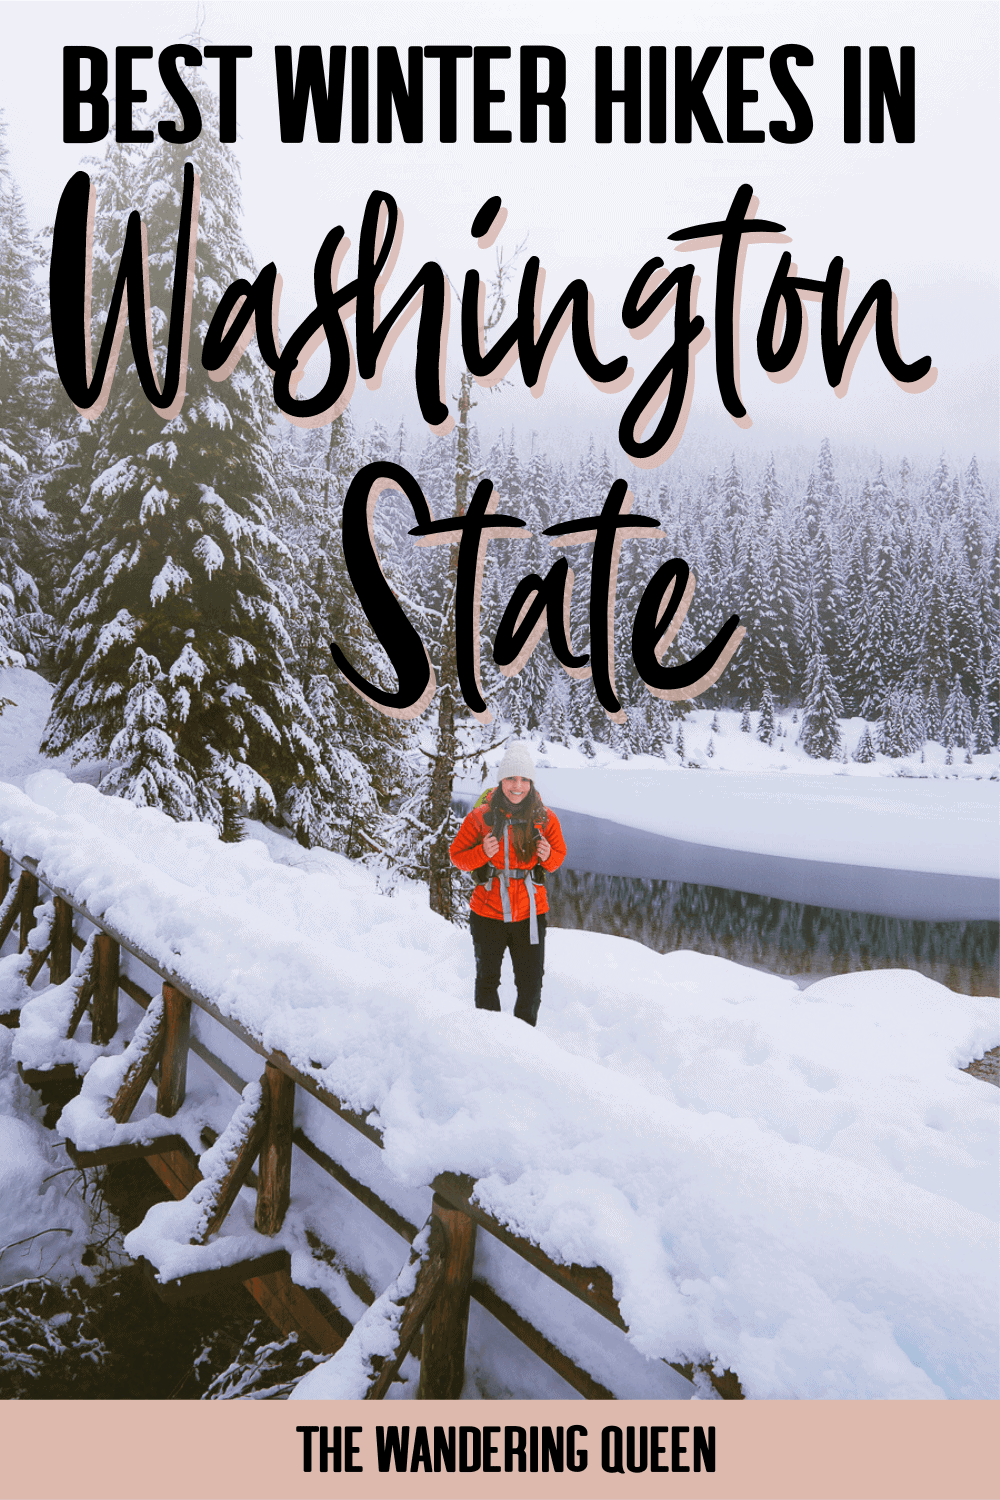 22 Best Winter Hikes In Washington State - The Wandering Queen